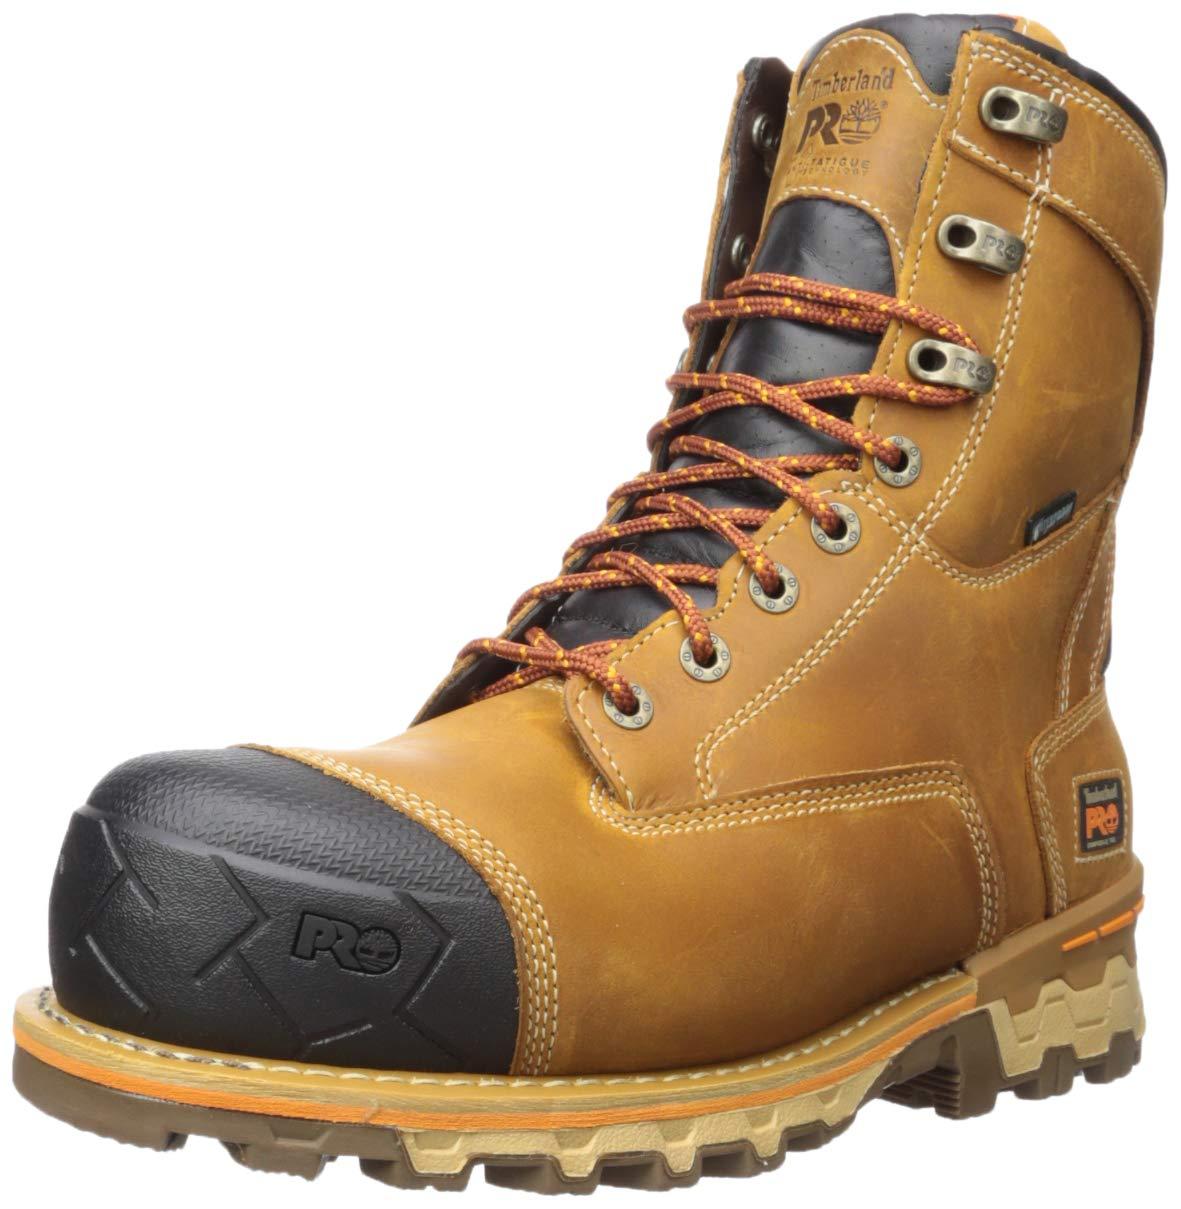 timberland pro 8 boondock 1000g composite safety toe waterproof insulated